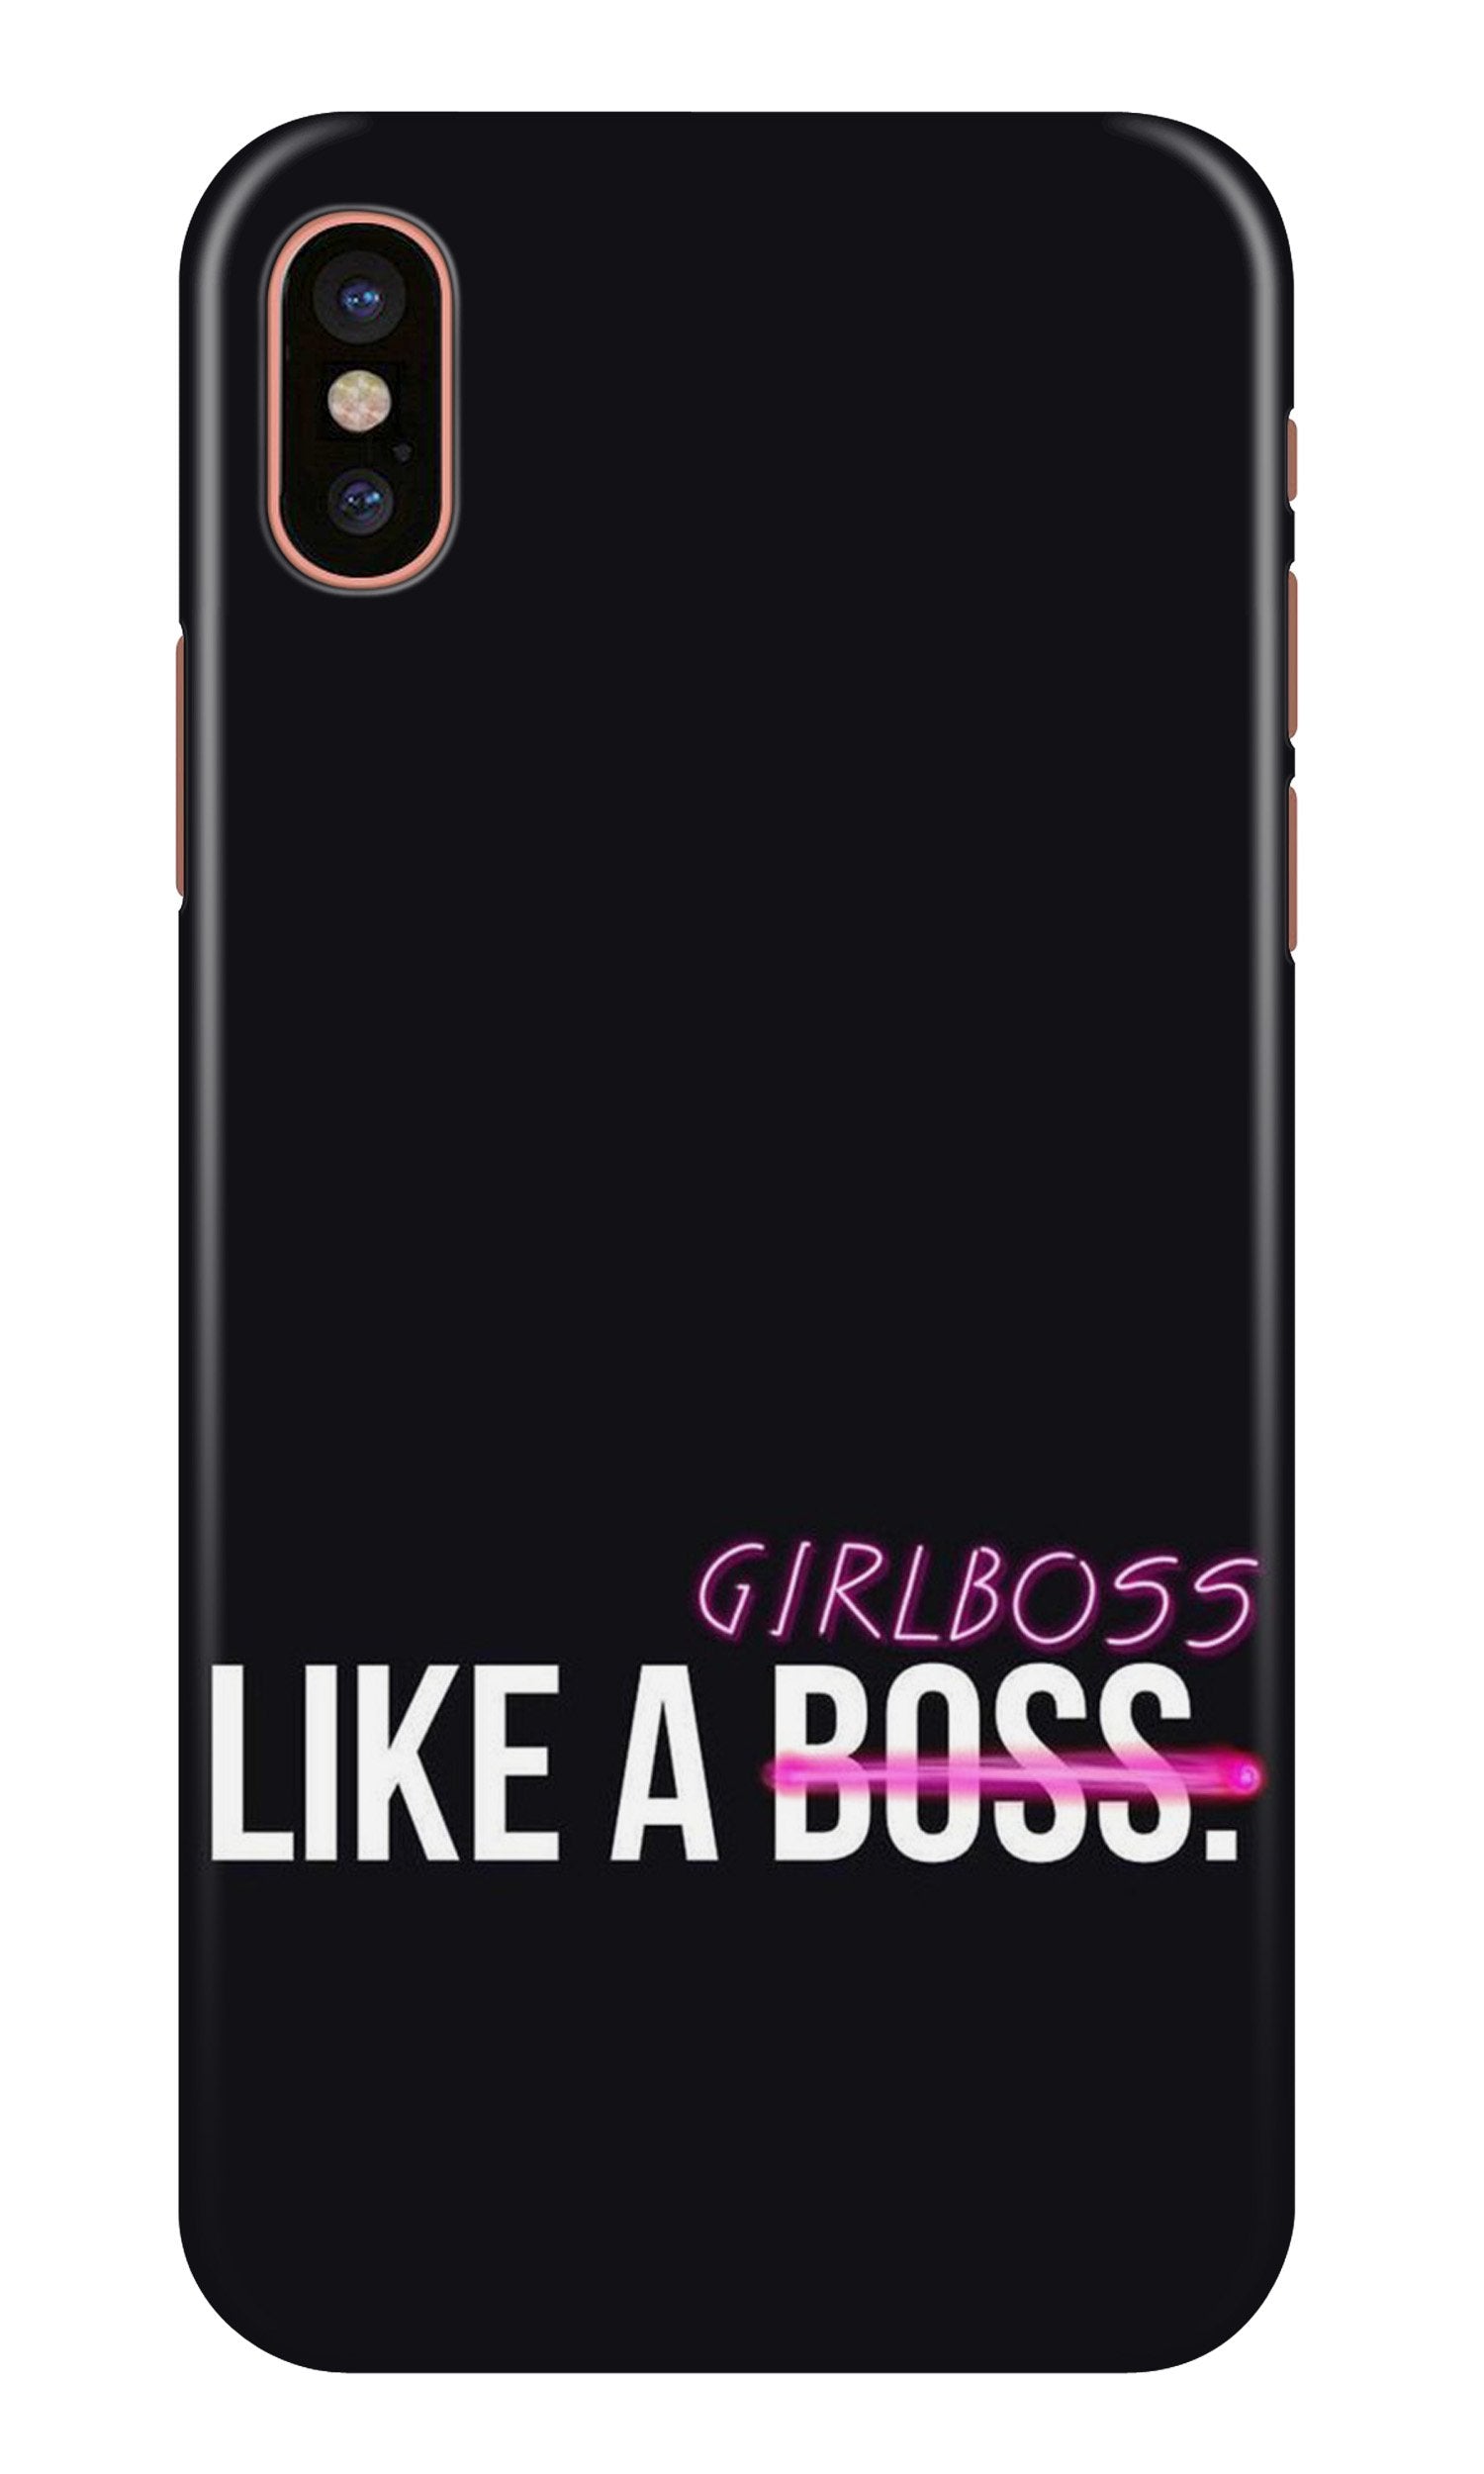 Like a Girl Boss Case for iPhone X (Design No. 265)